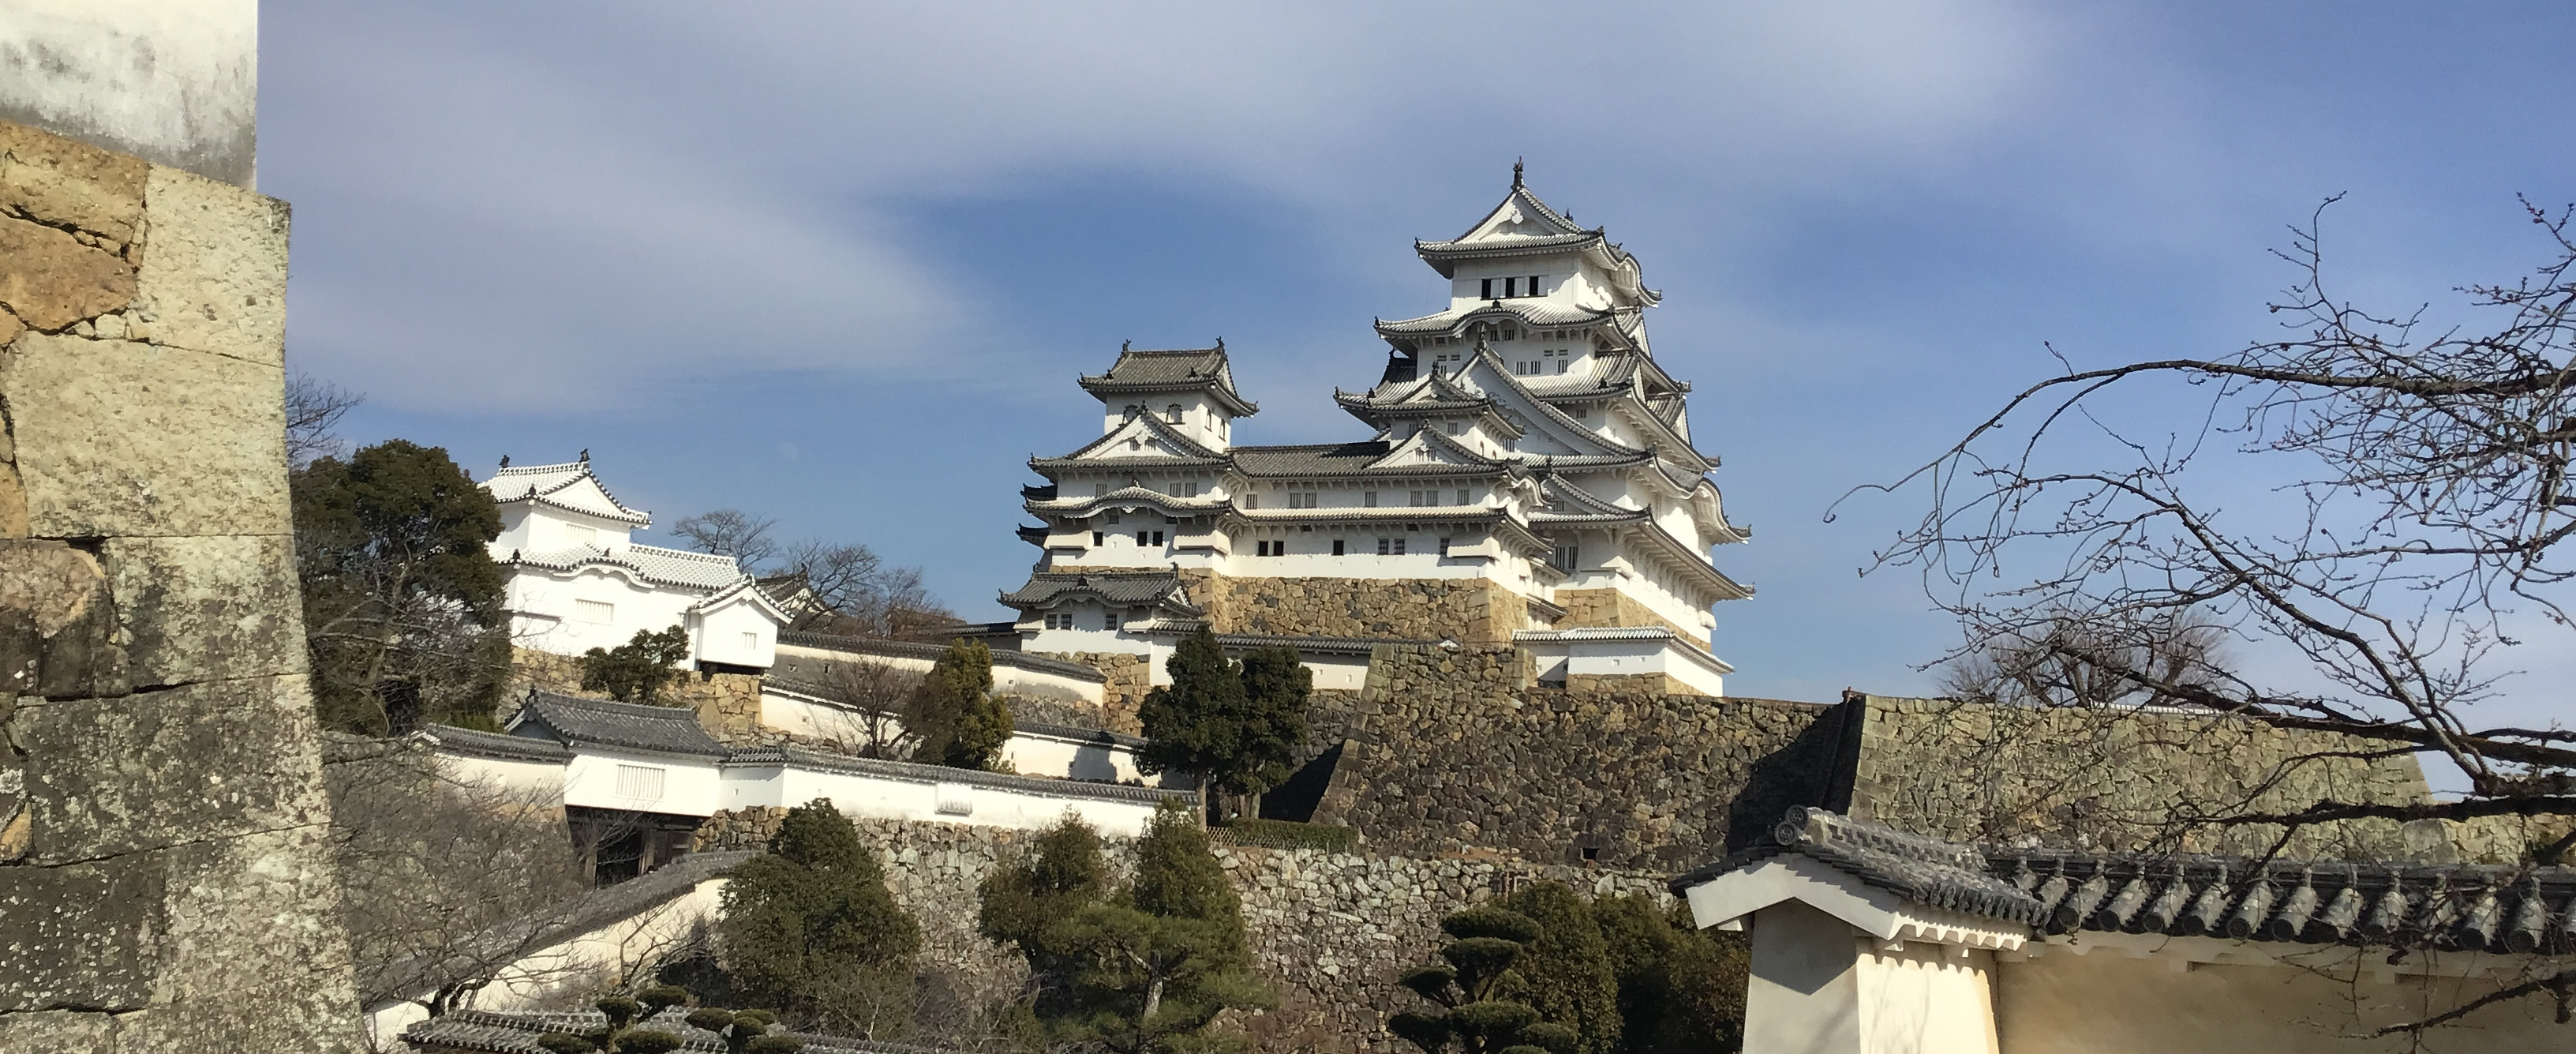 panoramic shot of Himeji castle and walls